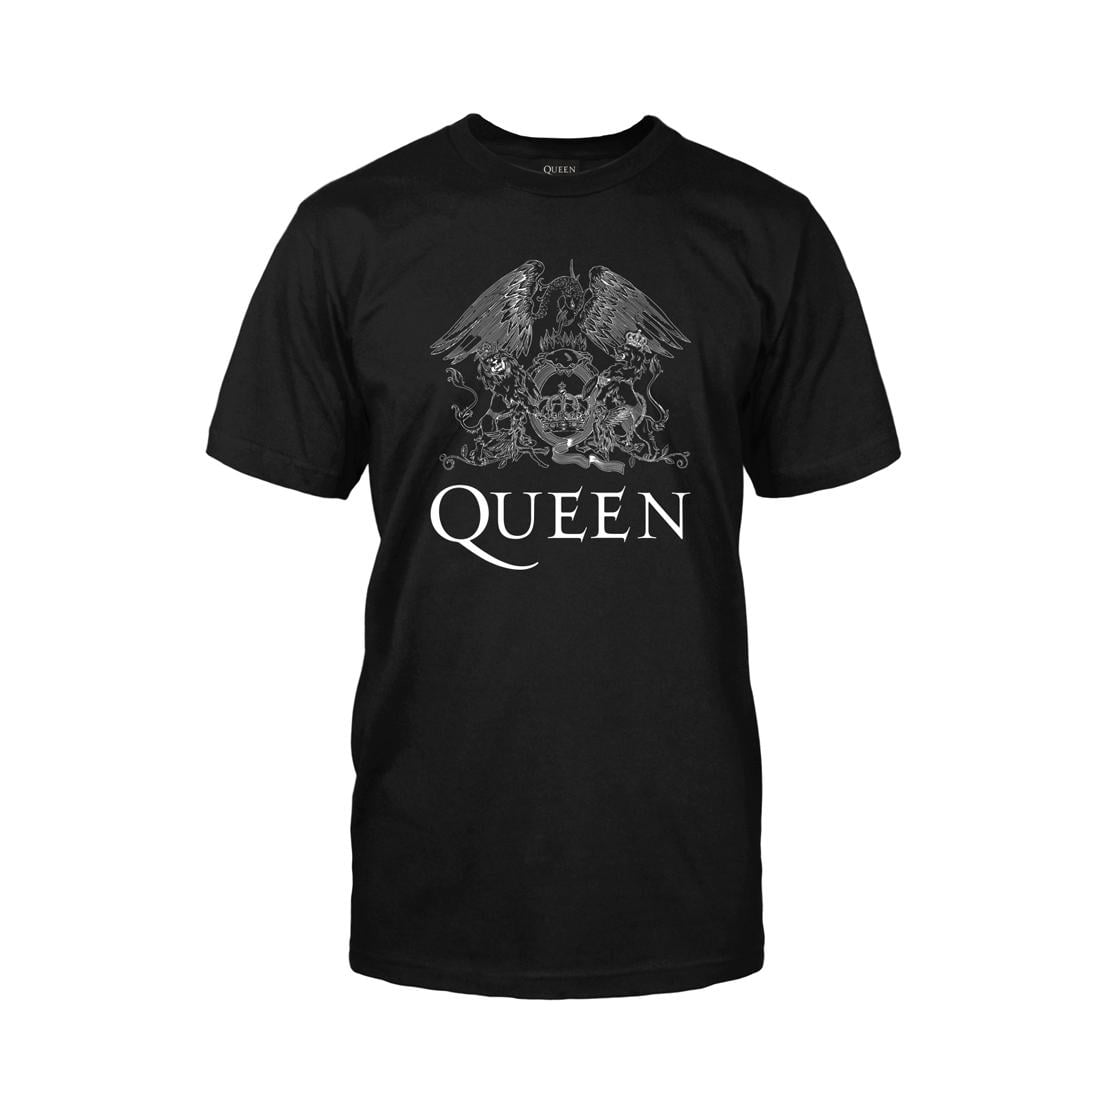 Logo Tee Graphic Unisex Short Crest Queen Band Official Black Sleeve